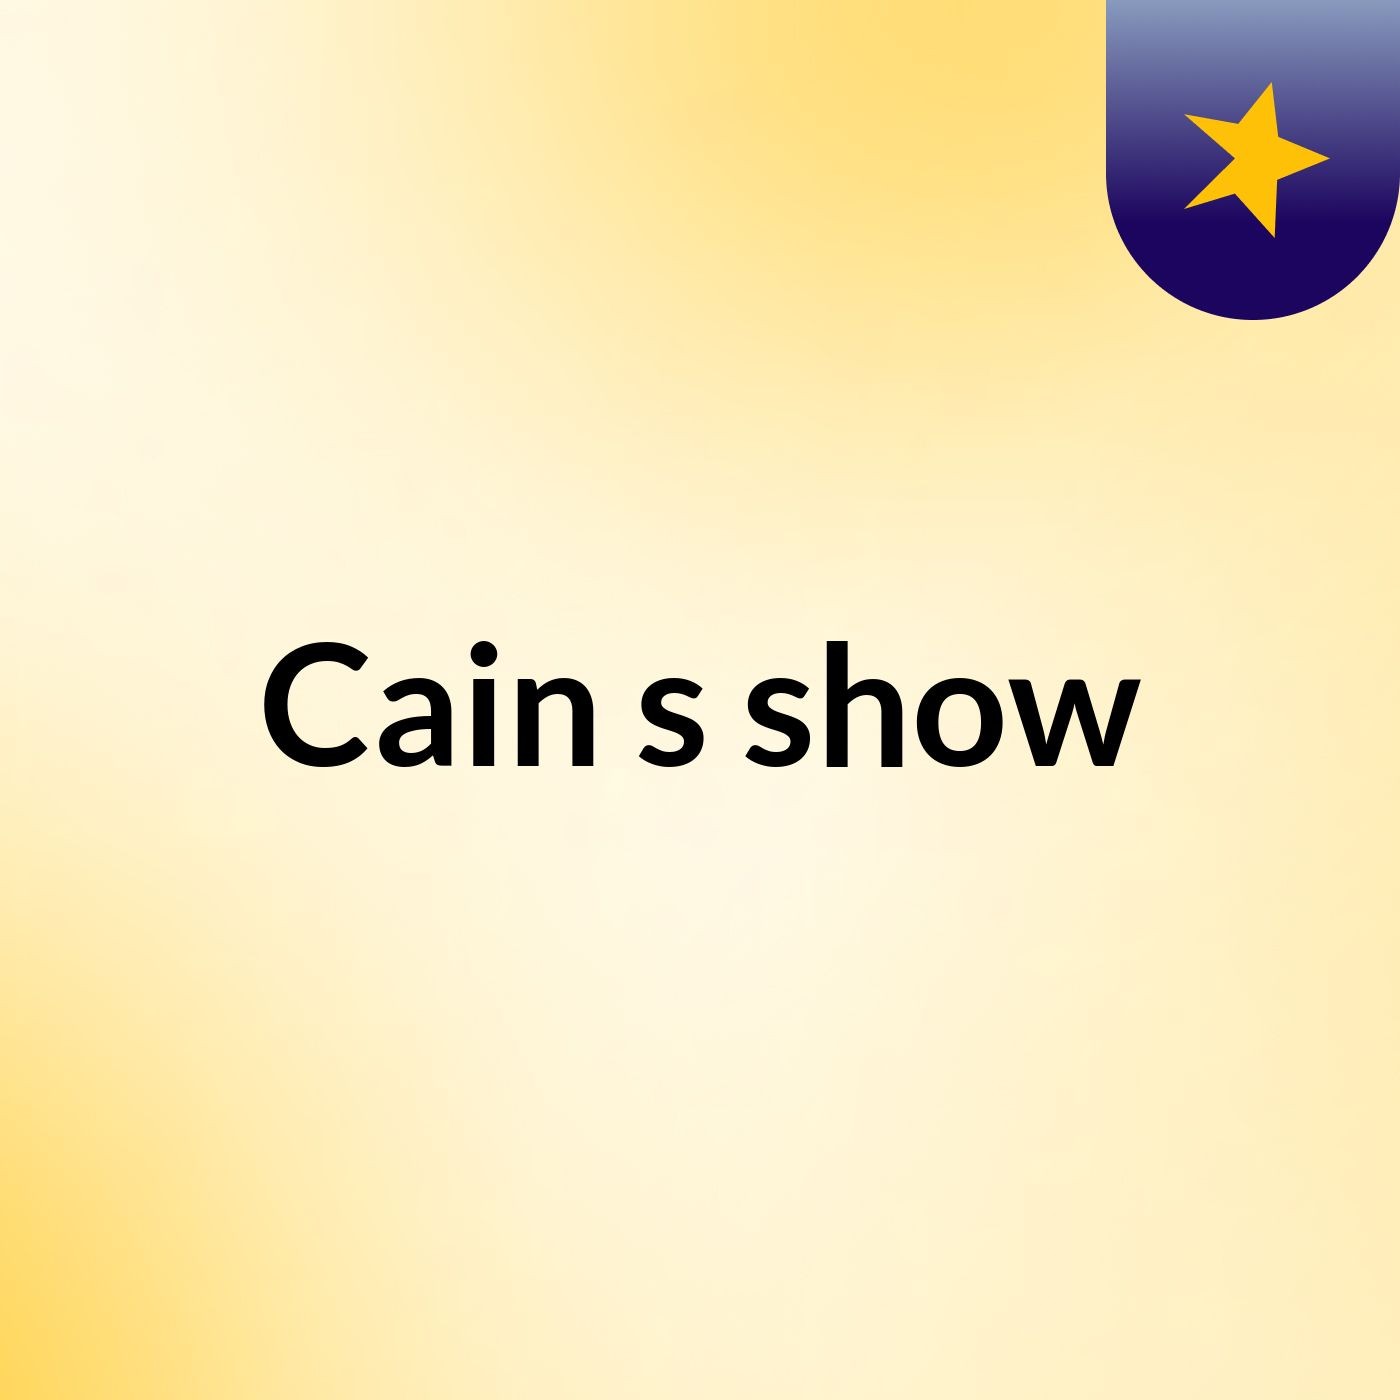 Cain's show